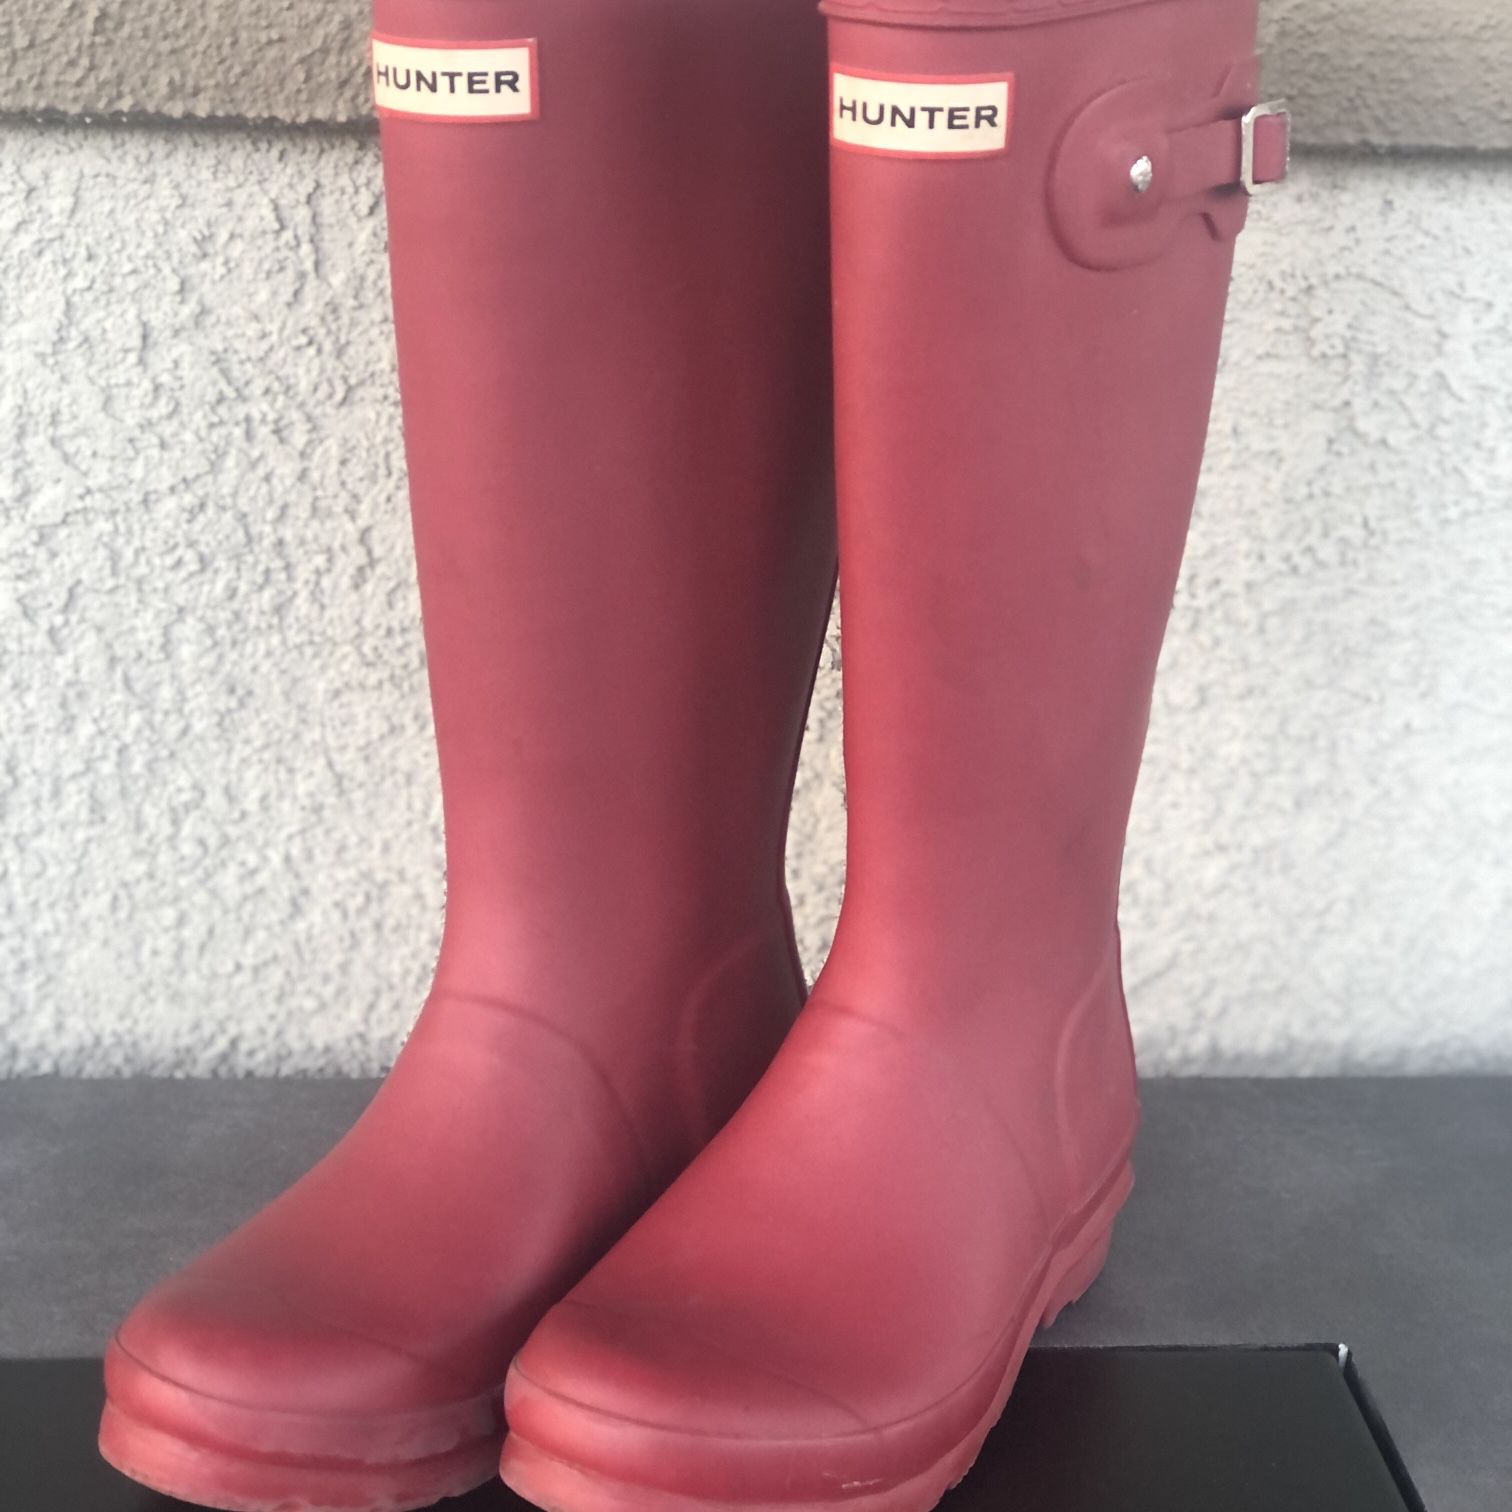 Youth Hunter Rain Boots, Youth Size 5